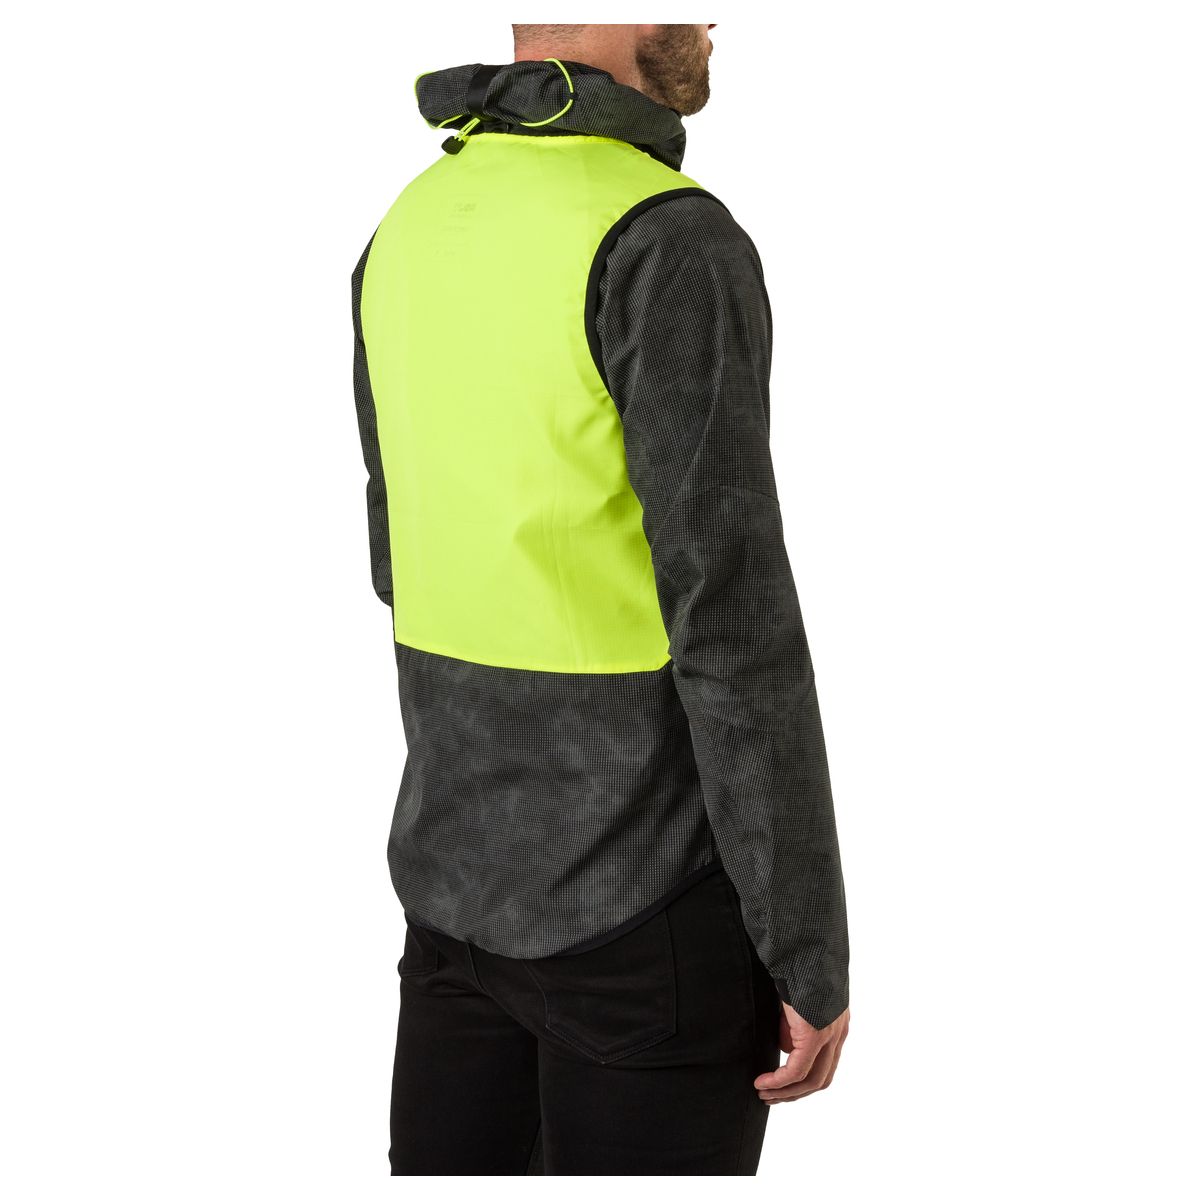 Compact Chaleco Commuter Hi-vis & Reflection fit example